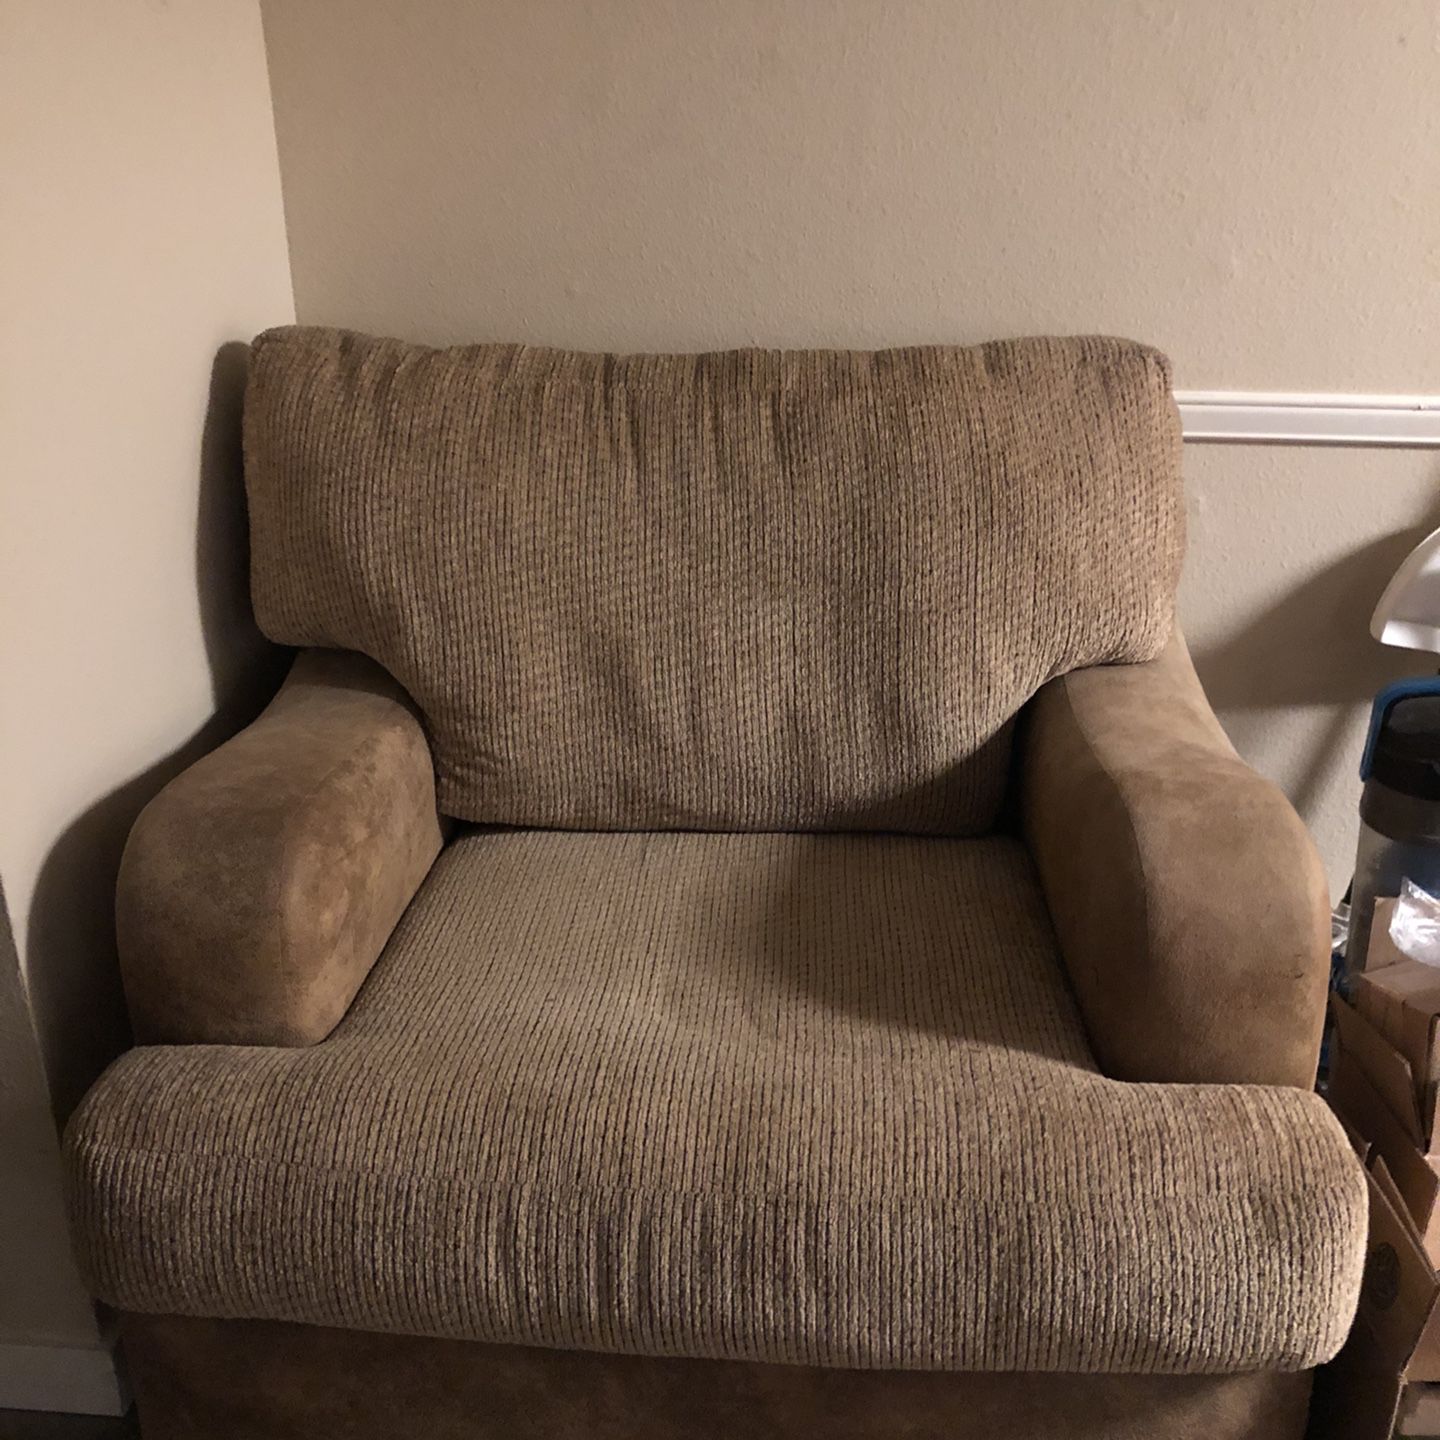 FREE Comfy Chair Needs Home